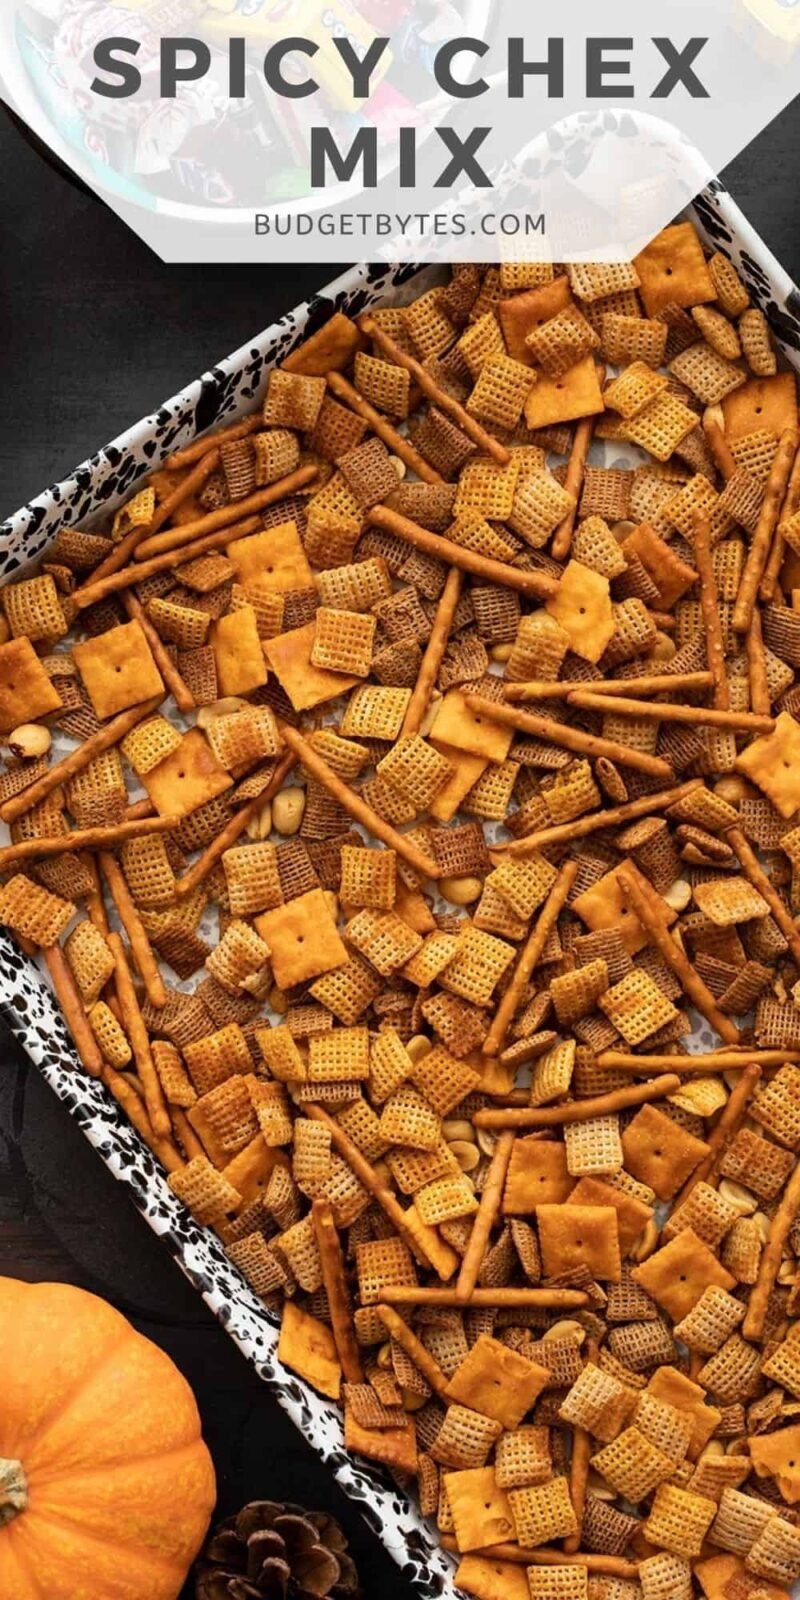 spicy chex mix on a baking sheet, title text at the top